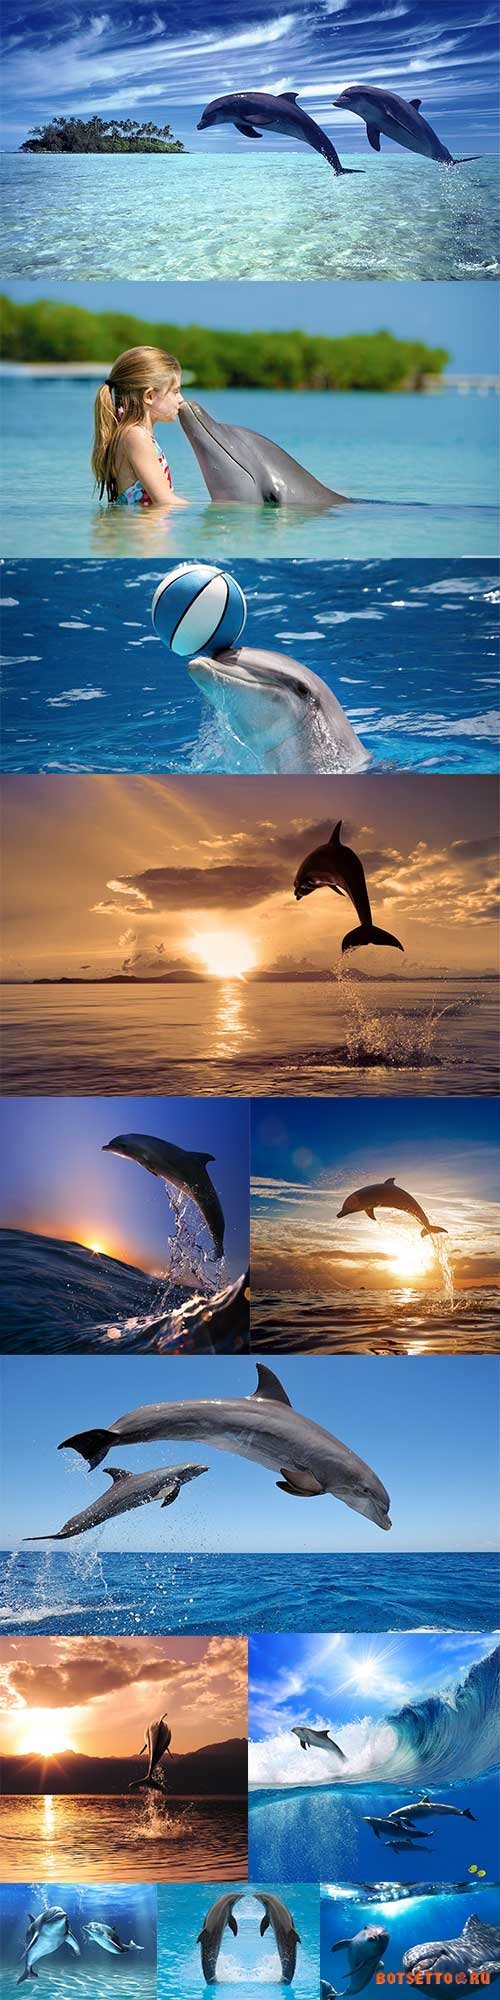 Graceful dolphins in the sea